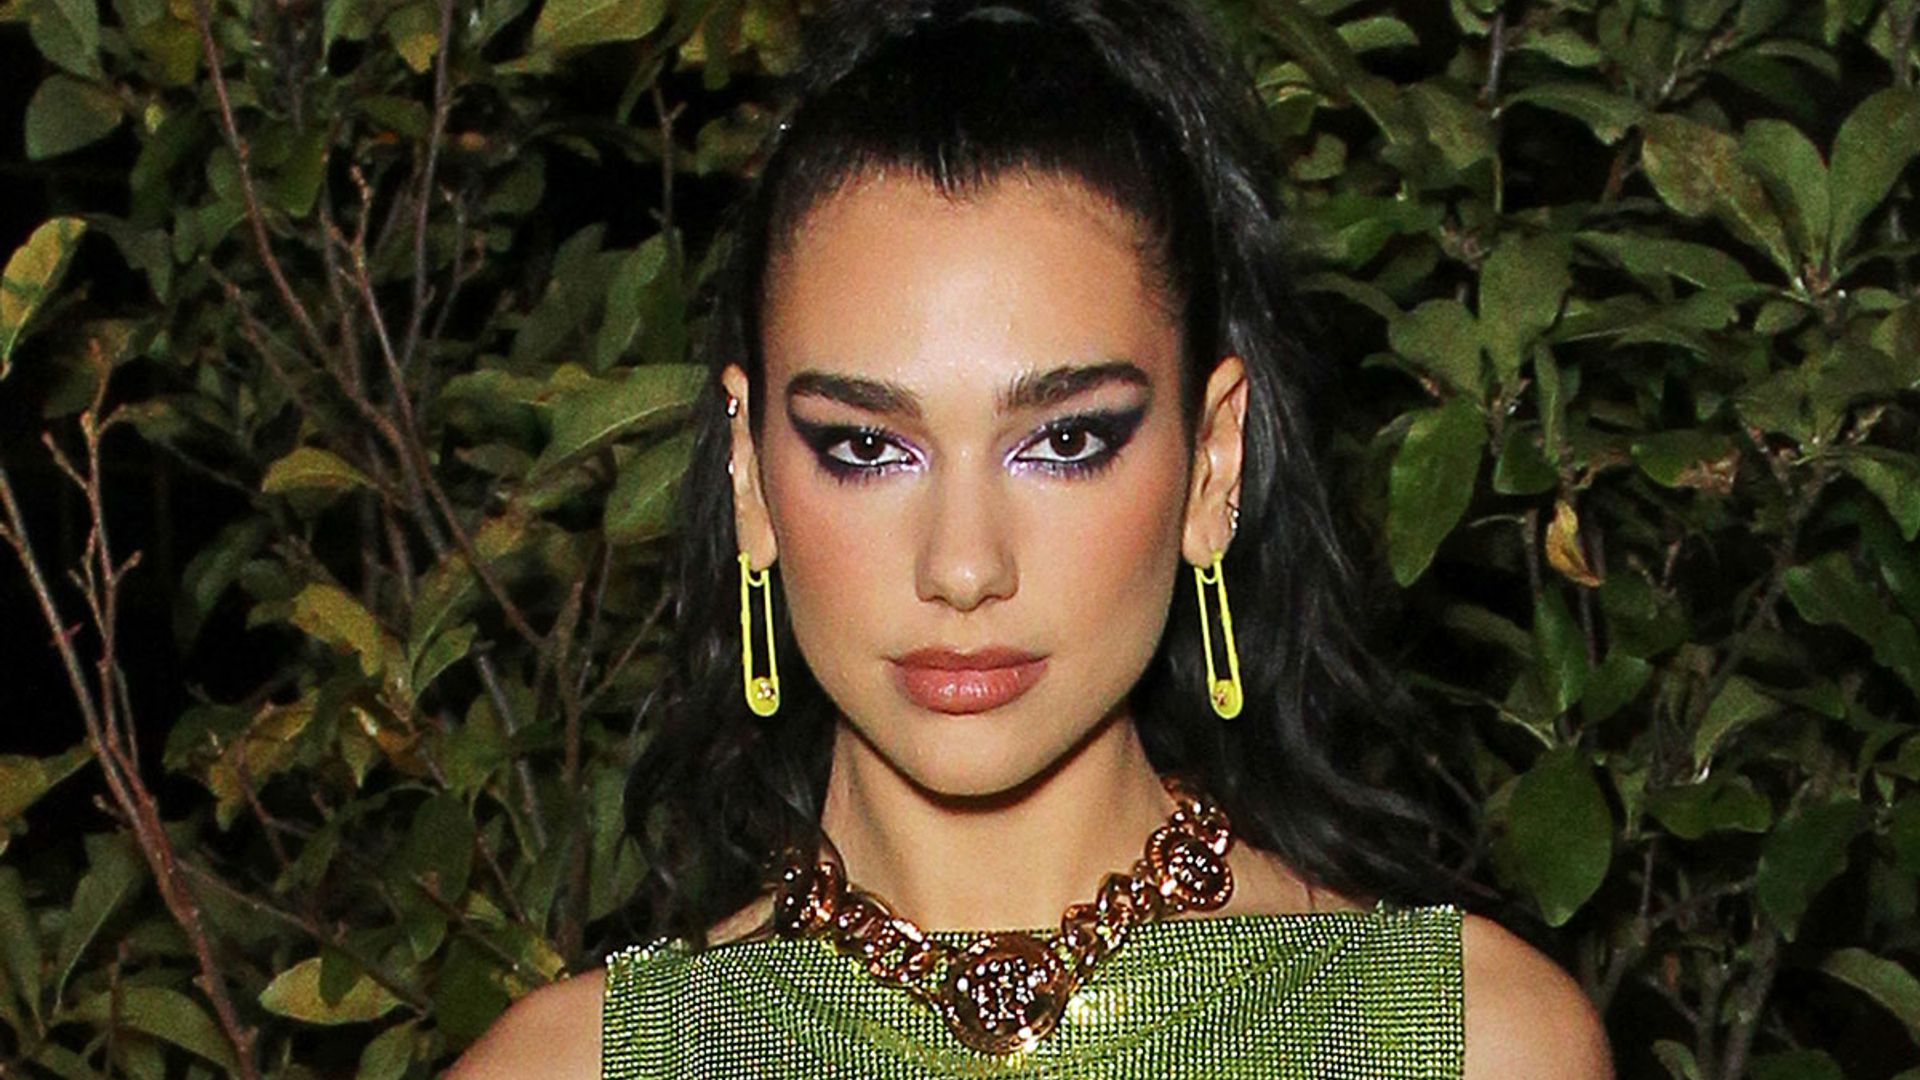 Dua Lipa Turns Up The Heat In Racy Cut Out Top And Jeans HELLO